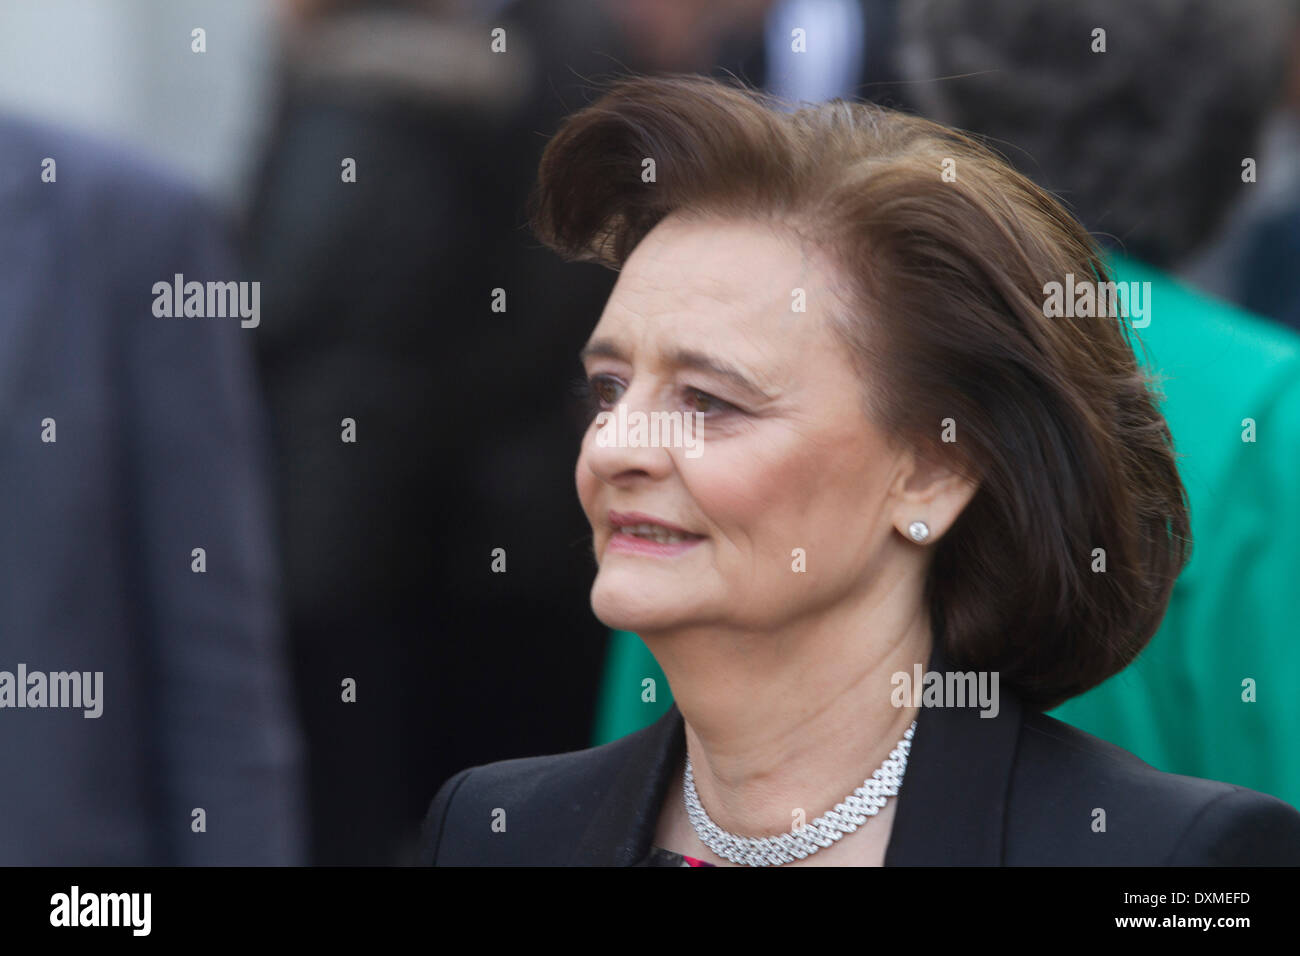 Westminster London, UK. 27th March 2014. Cherie Blair QC wife of former British Prime Minister Tony Blair as one of many guests and dignitaries attending the funeral service of former Labour MP Tony Benn at St Margaret's Church in Westminster Credit:  amer ghazzal/Alamy Live News Stock Photo